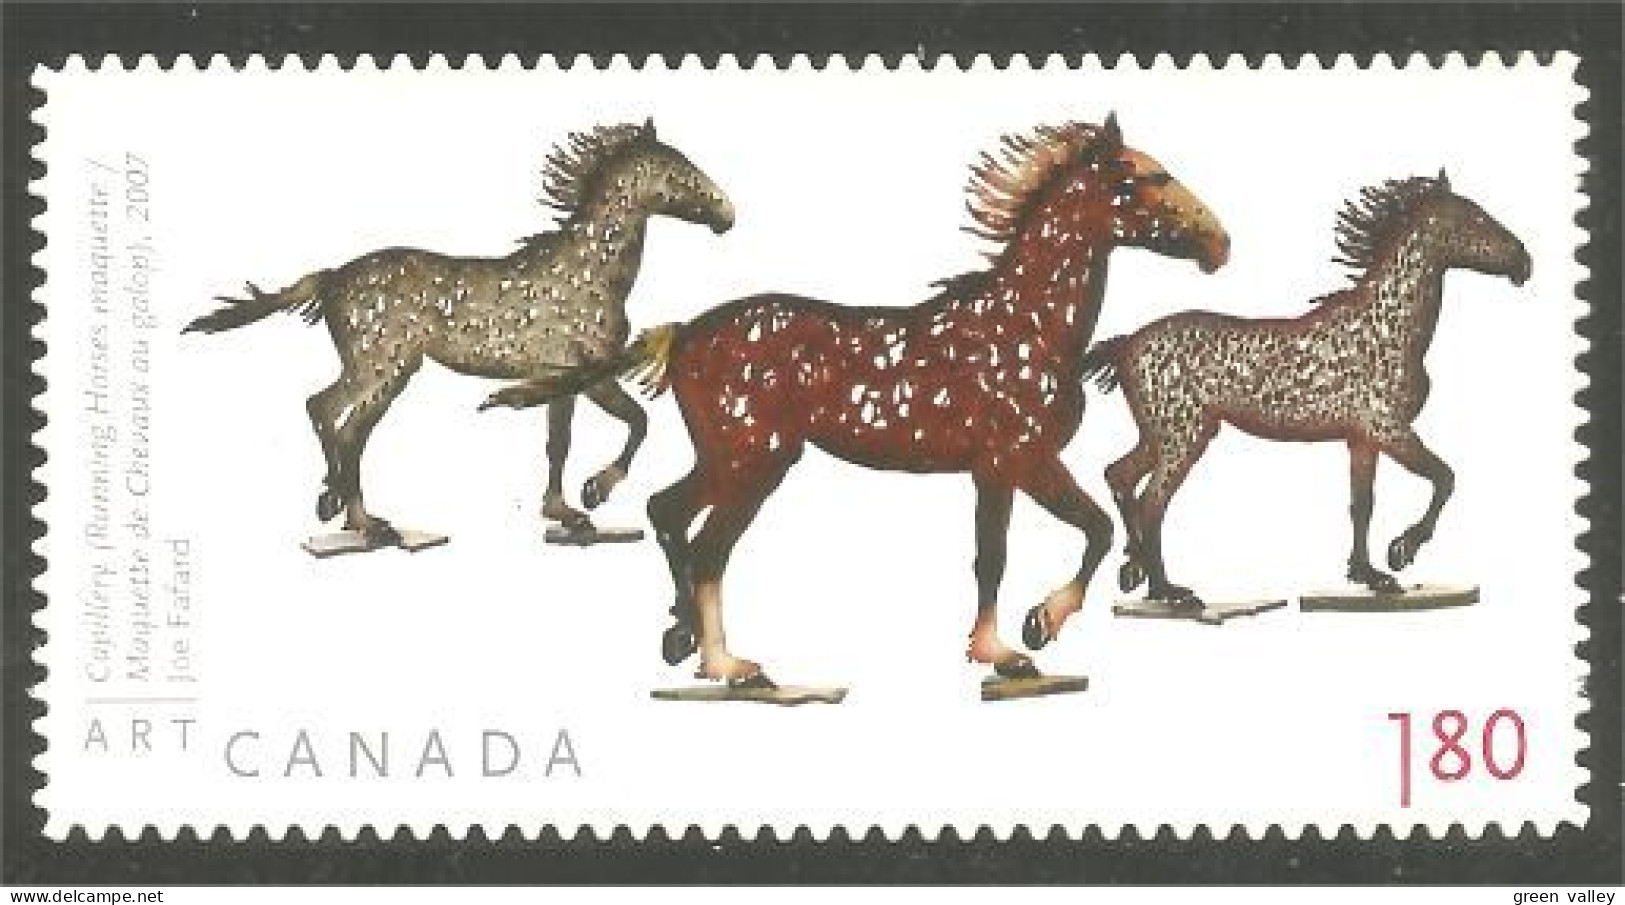 Canada Cheval Chevaux Horses Pferd Cavalle Caballe Annual Collection Annuelle MNH ** Neuf SC (C25-25i) - Chevaux